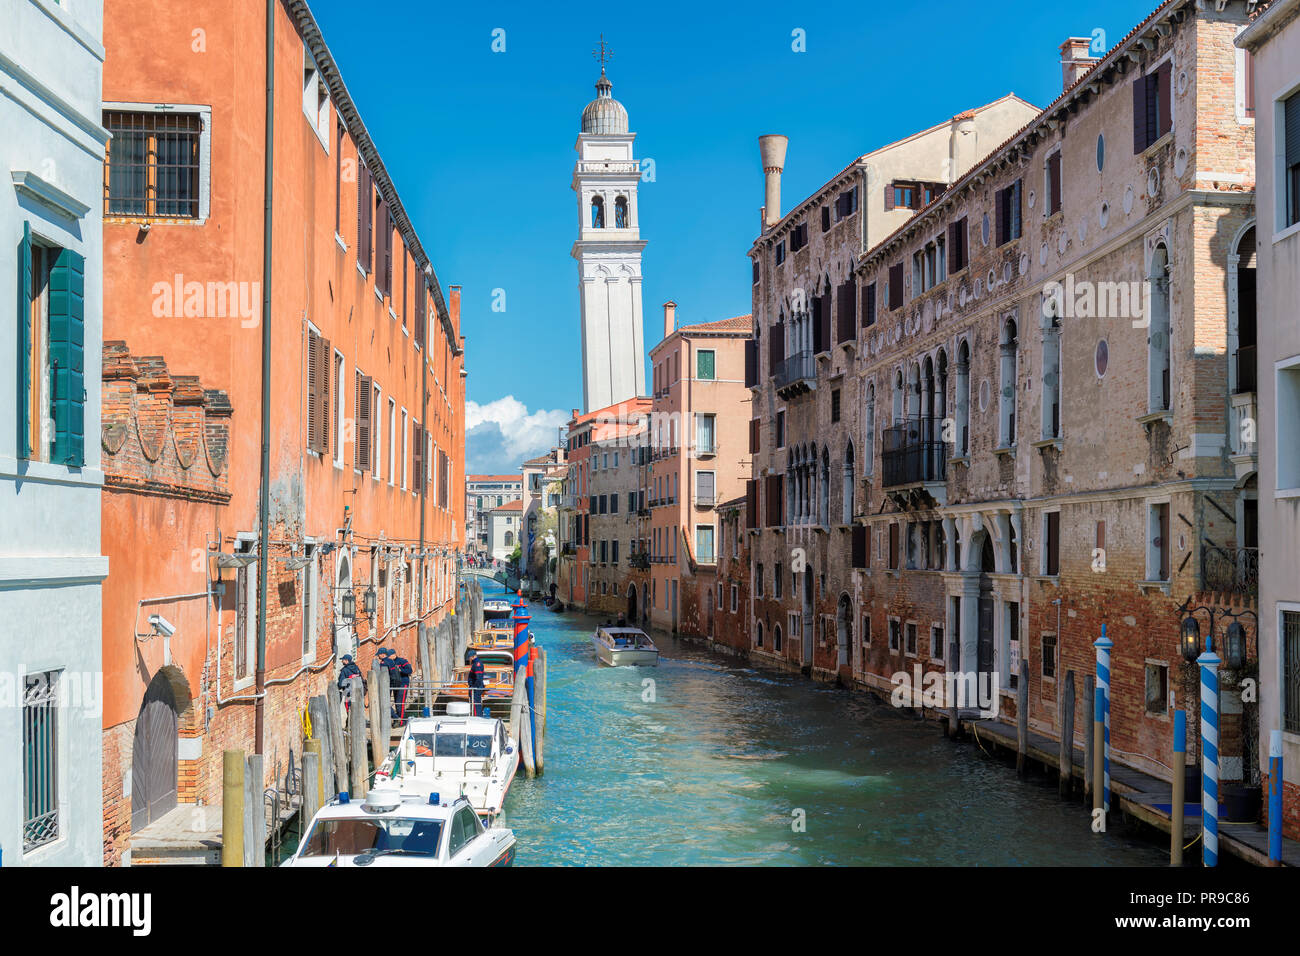 Old canal in Venice with boats parked near of residential buildings, Italy Stock Photo